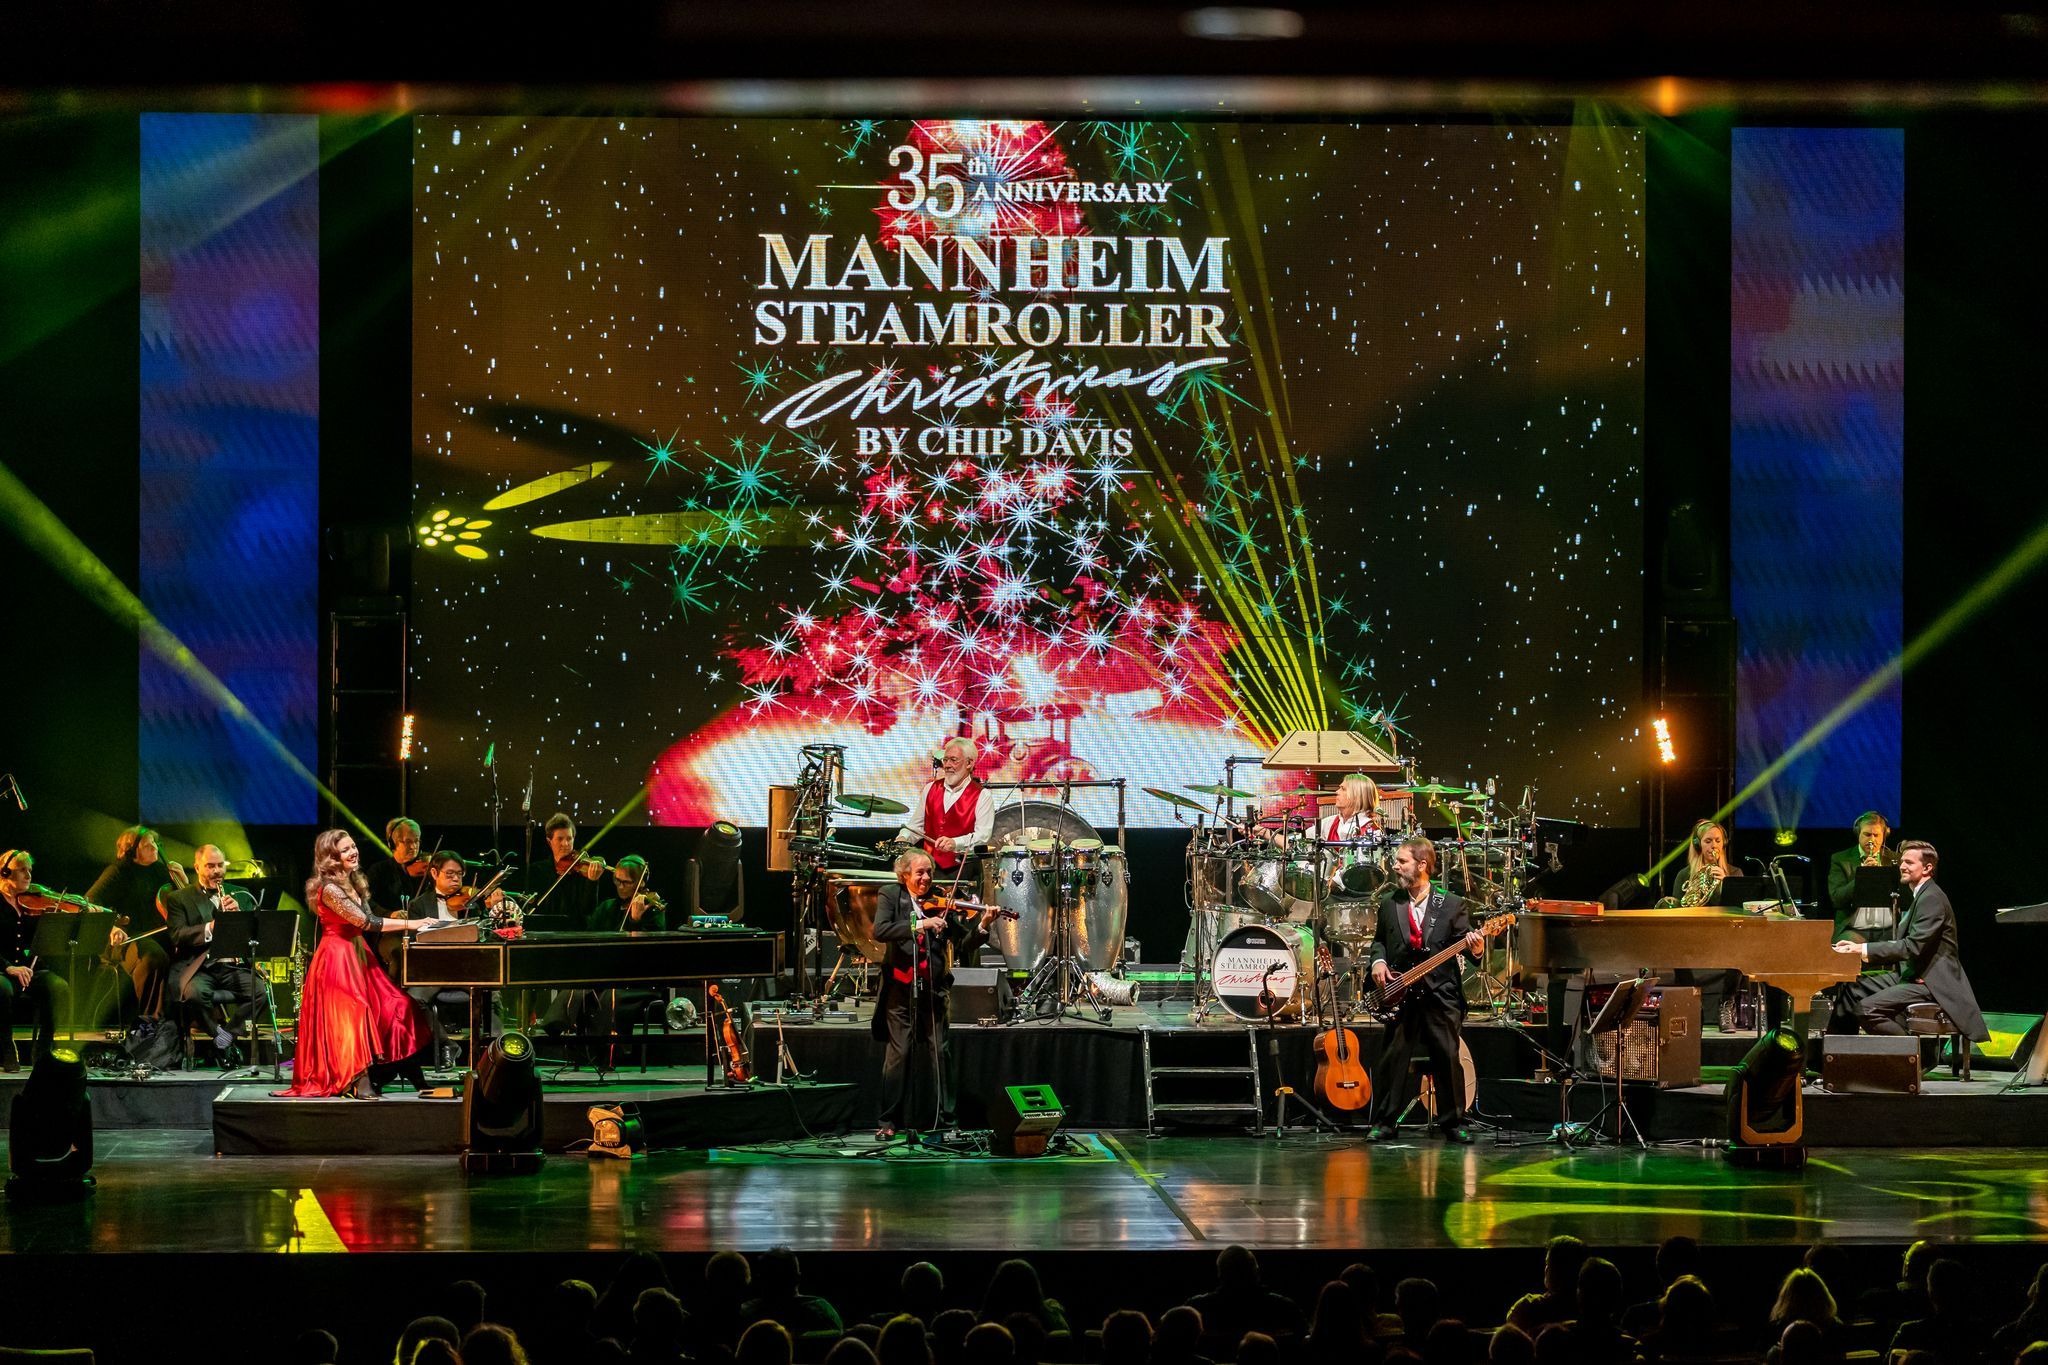 <h1 class="tribe-events-single-event-title">Mannheim Steamroller Christmas Show</h1>